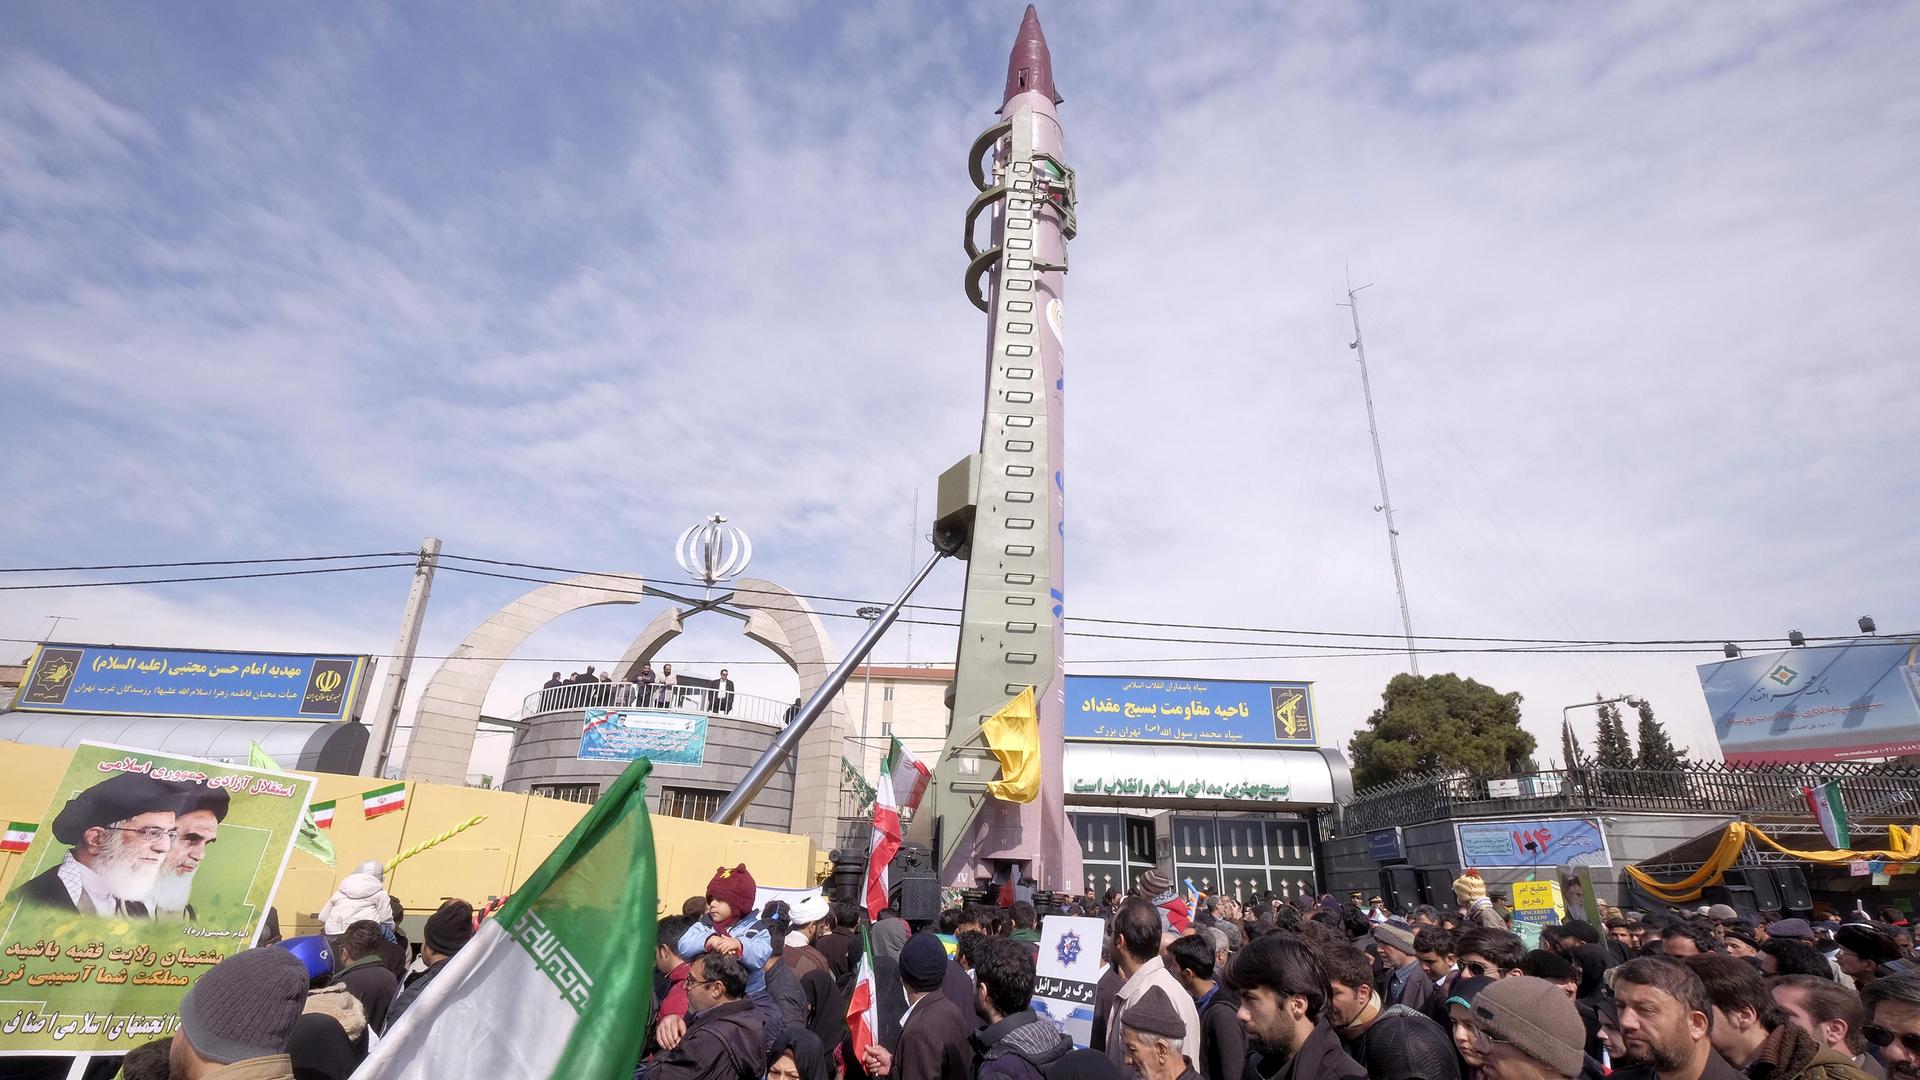 An Iranian-made Emad missile is displayed during a ceremony marking the 37th anniversary of the Islamic Revolution